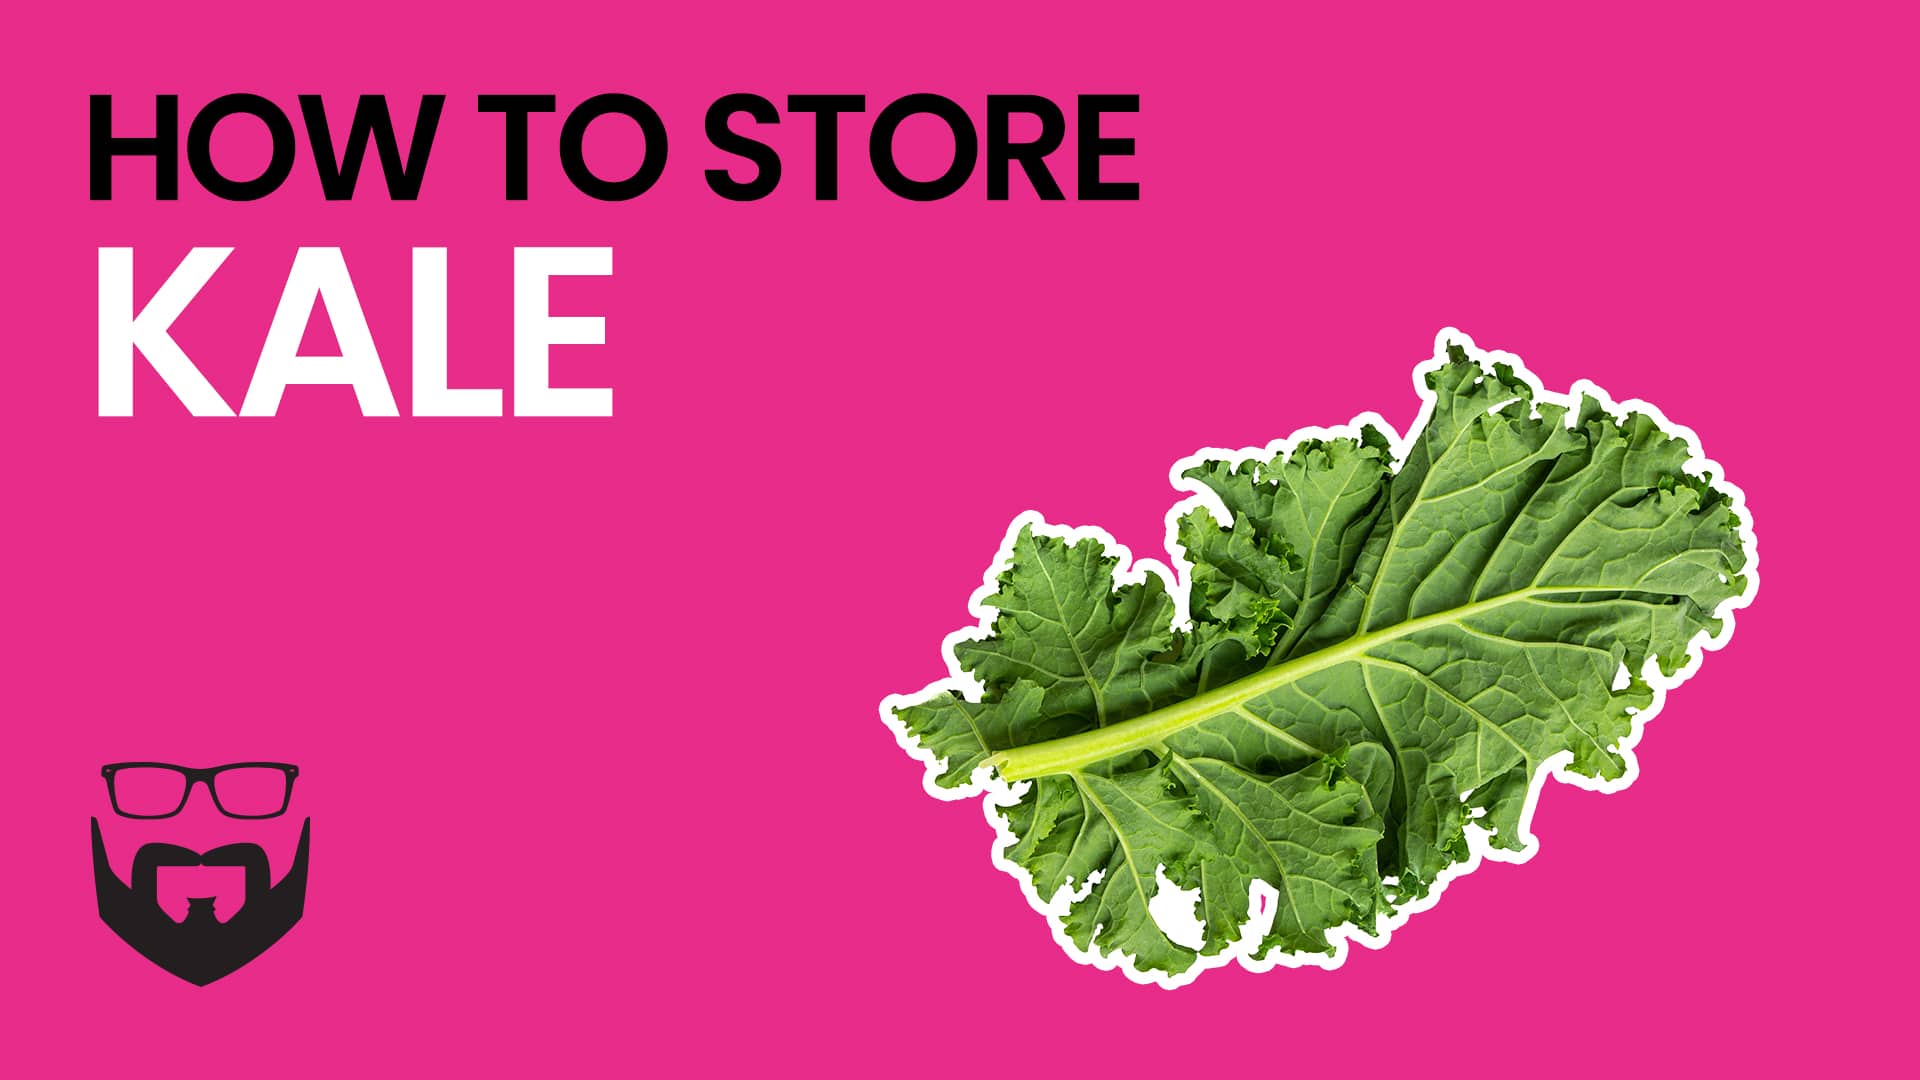 How to Store Kale Video - Pink